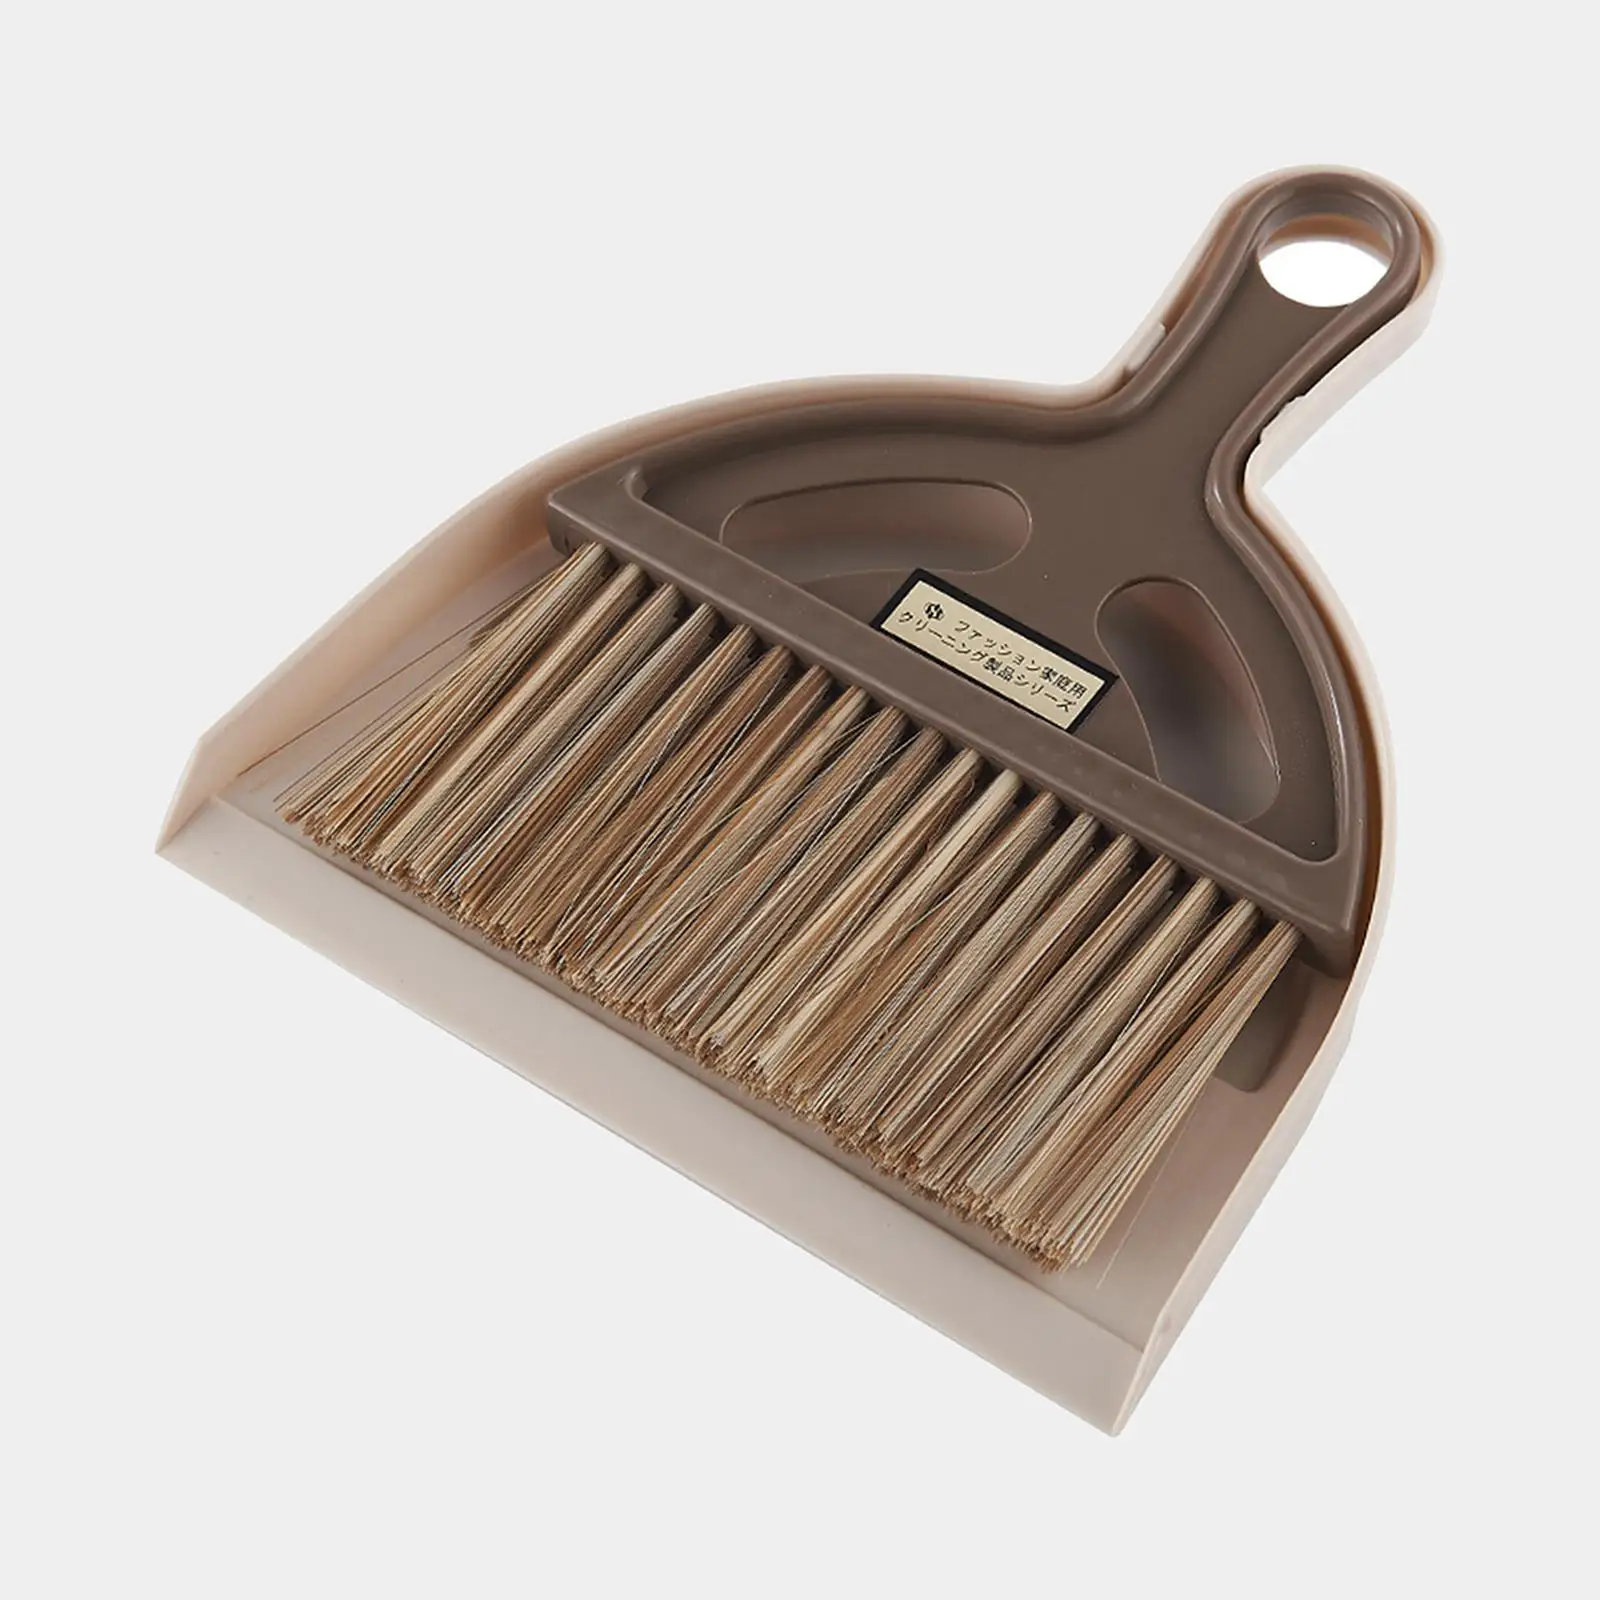 Small Broom and Dustpan Set Portable Hand Broom for Desktop Home Cleaning